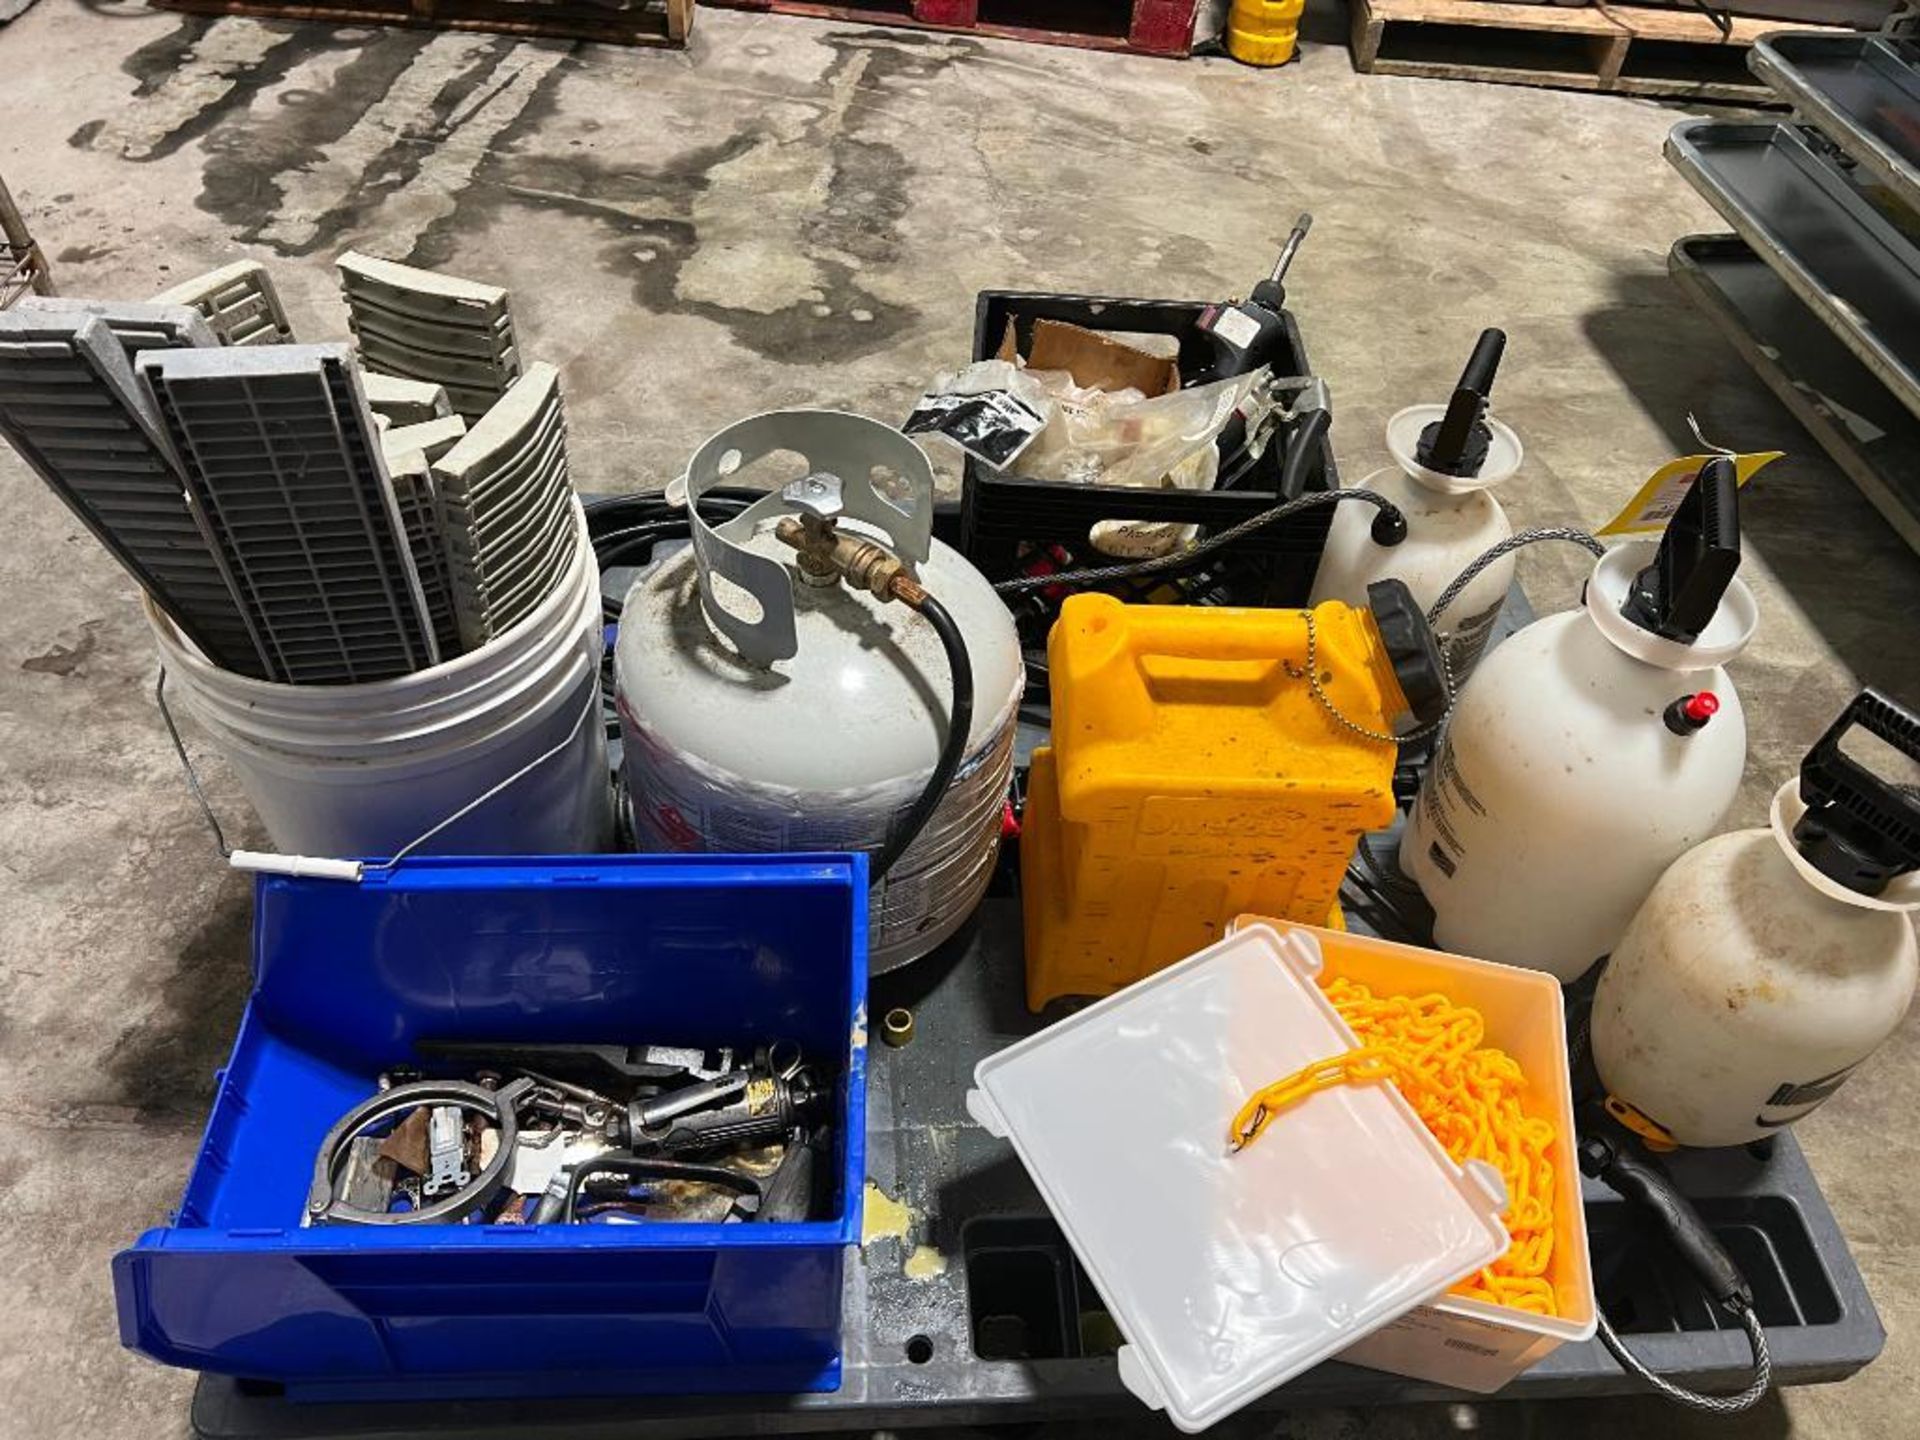 Assorted Sprayers, Fuel Containers, Drain Covers and Hydraulic Hoses - Rigging Fee: $100 - Image 2 of 2